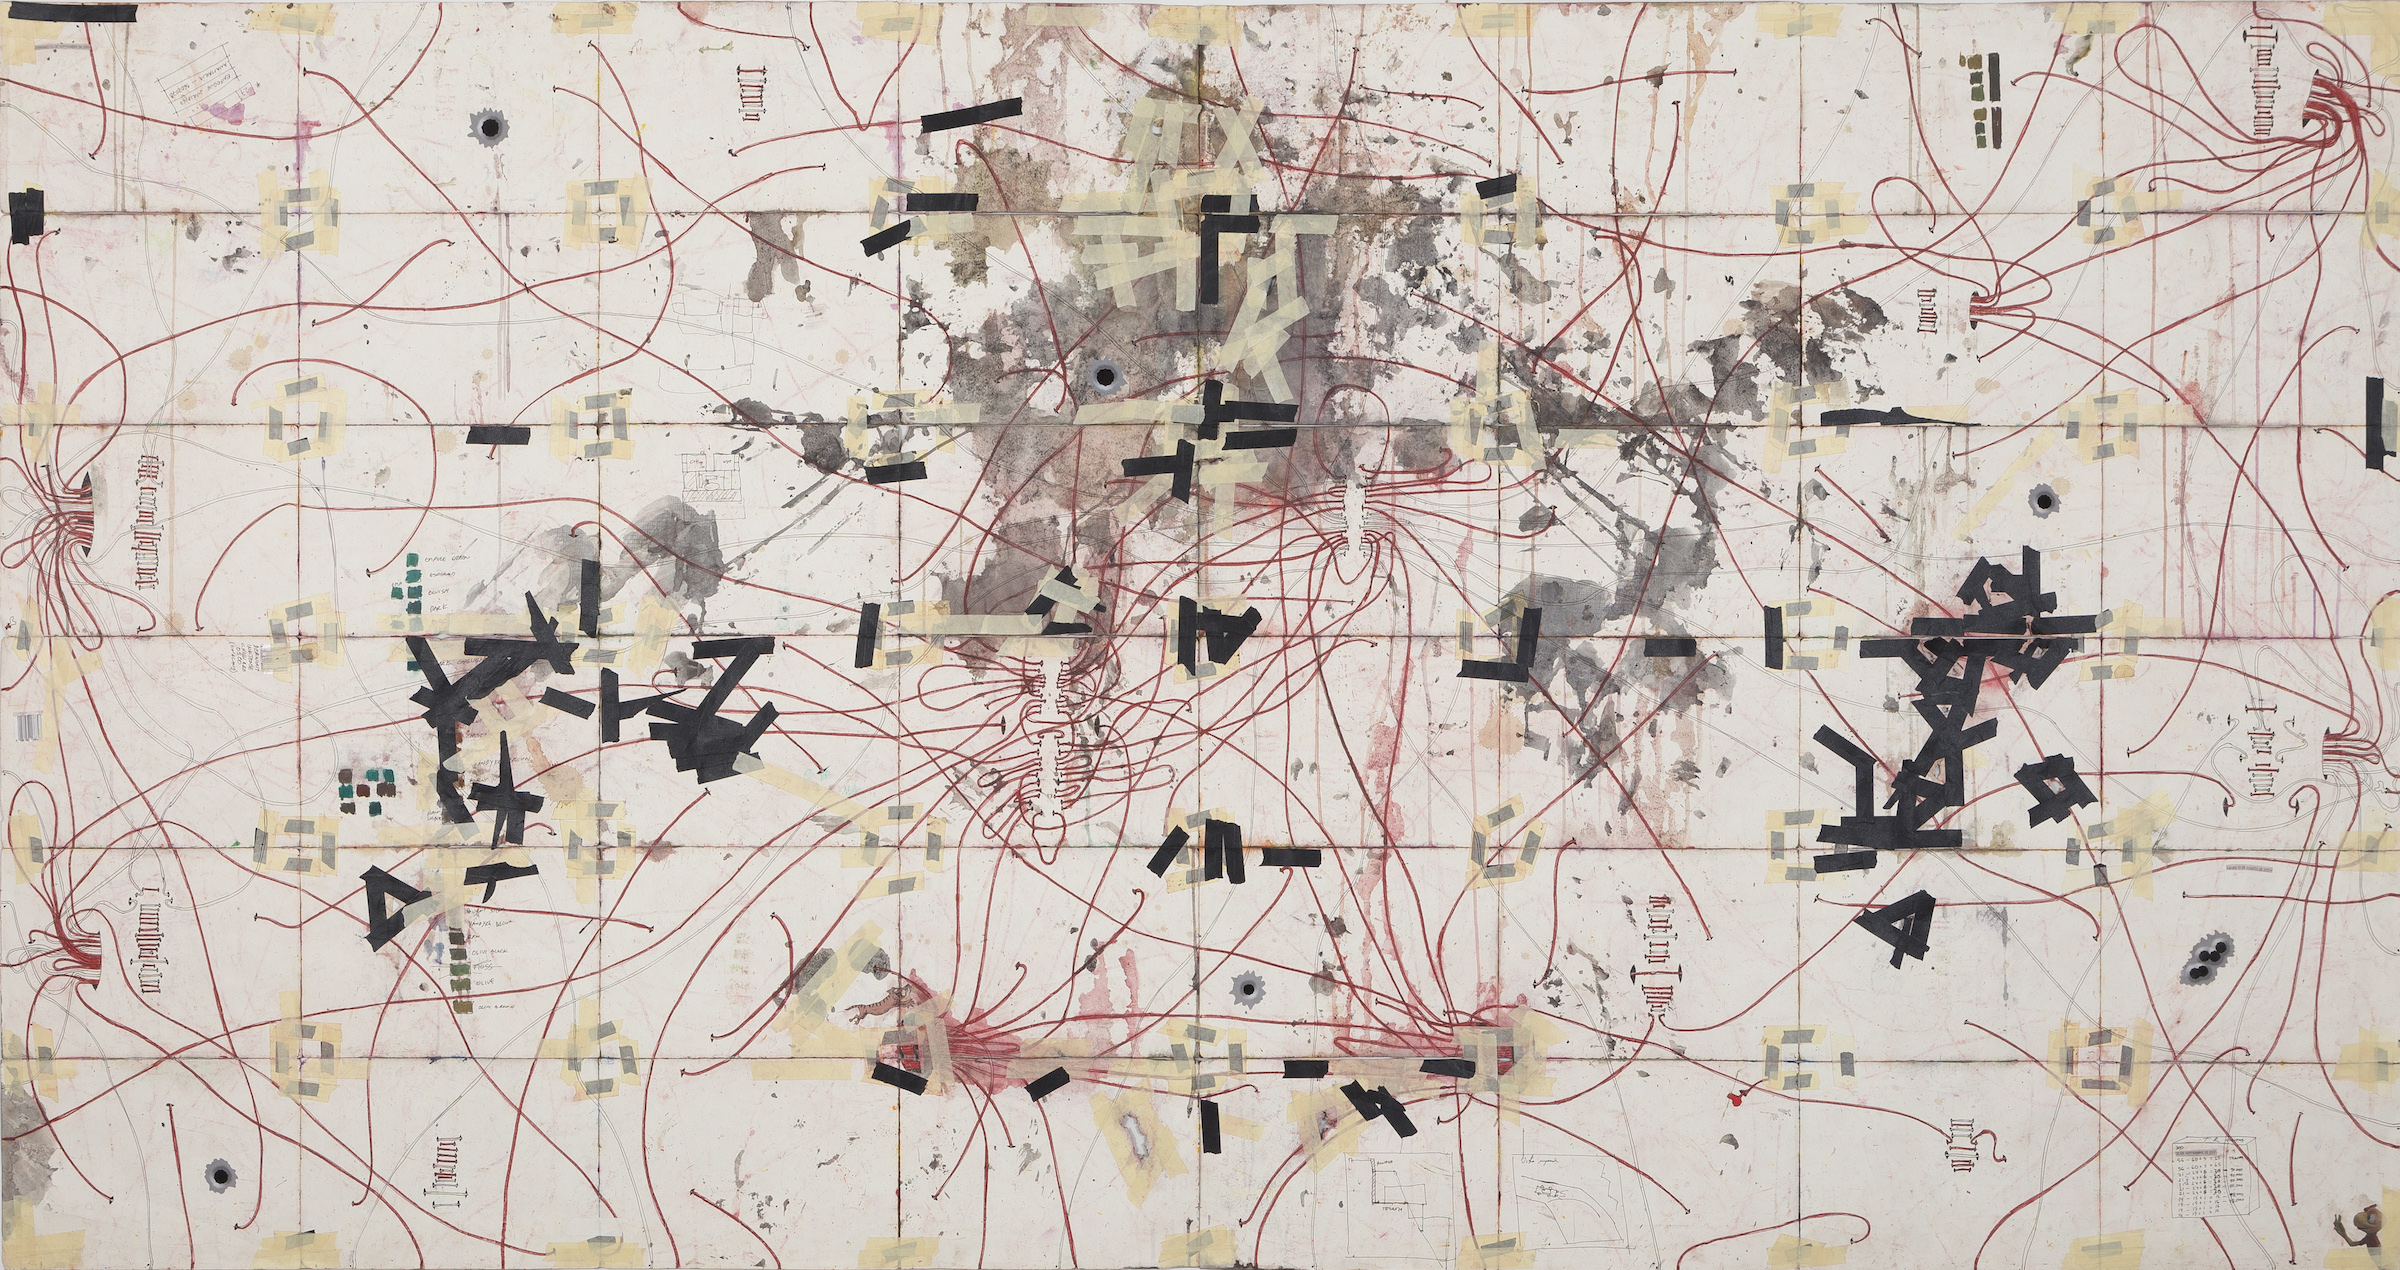 Camilo Restrepo. <em>A Land Reform 15</em>, 2017. Ink, water-soluble wax pastel, tape, stickers, newspaper clippings, glue and saliva on paper, 45 3/4 x 94 inches (116.3 x 238.8 cm) (back)